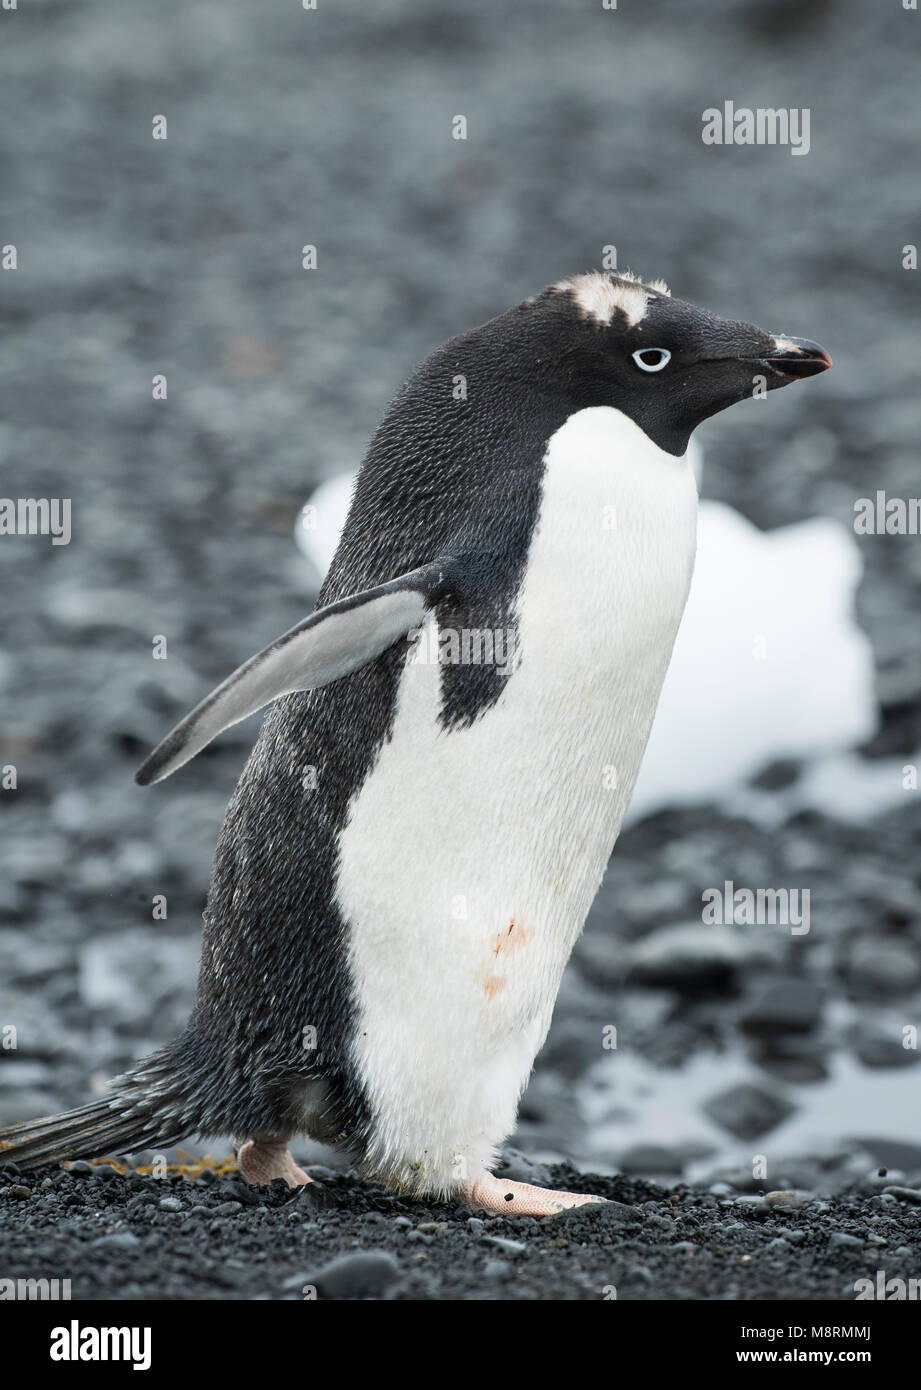 An Adelie penguin stands along the shoreline at Brown Bluff, Antarctica in the late stages of molting, with visible feathers on the top of its head. Stock Photo